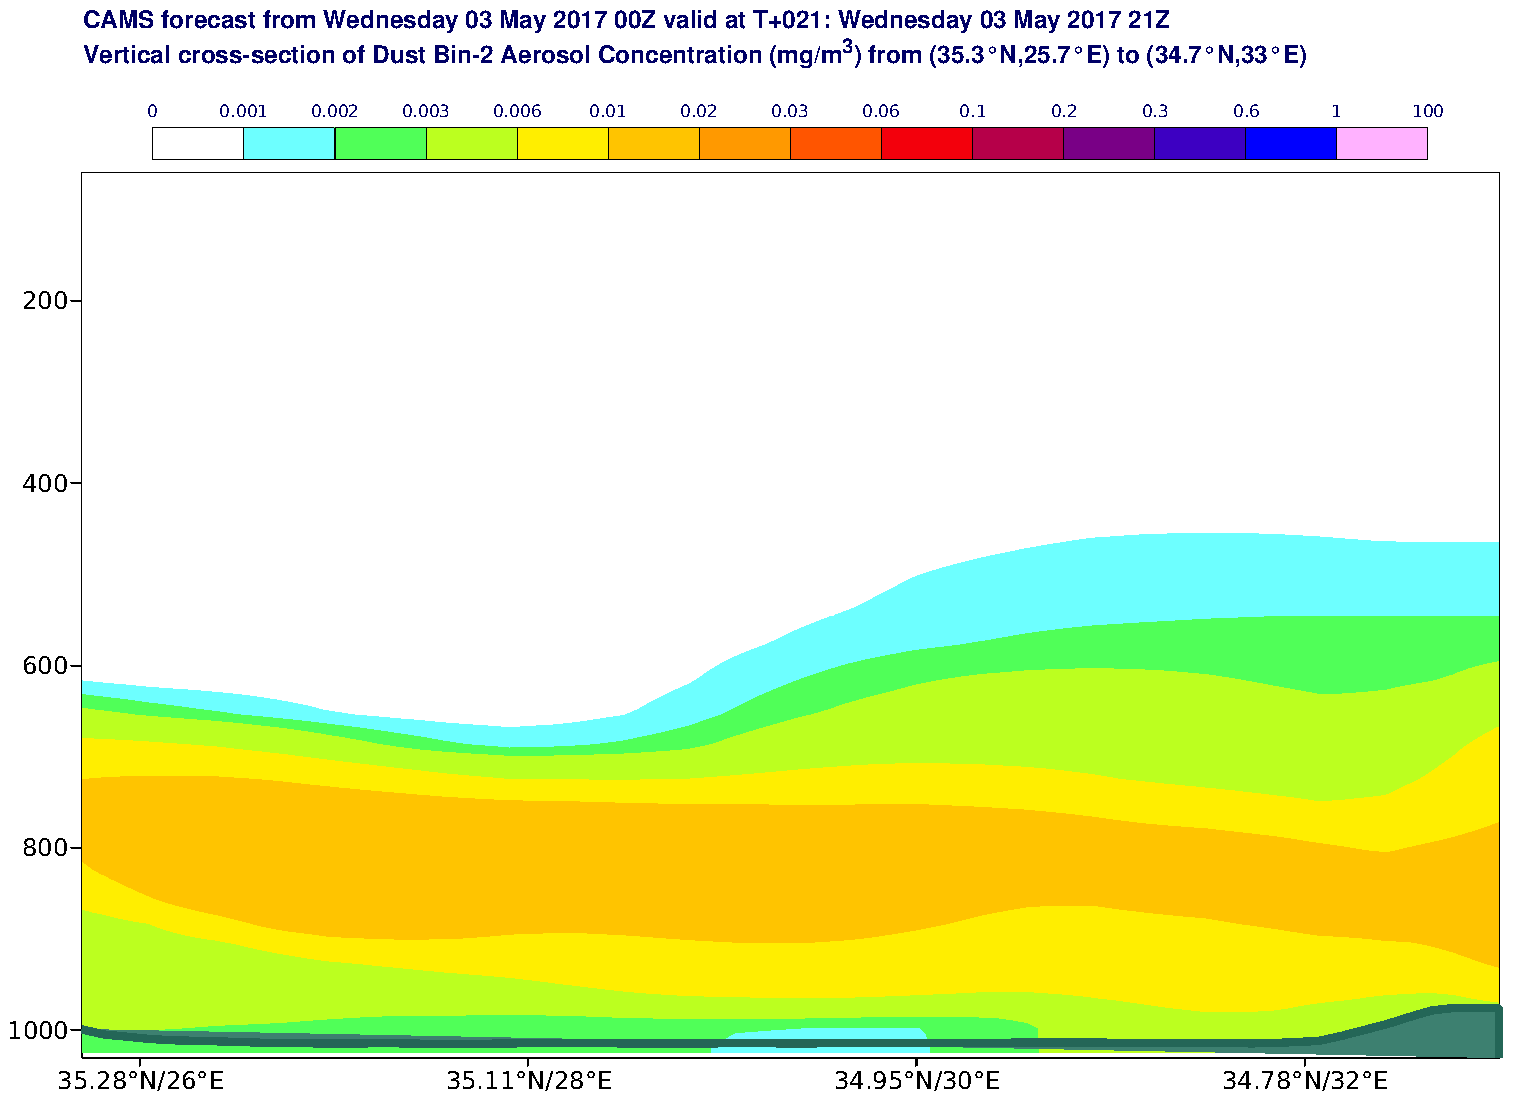 Vertical cross-section of Dust Bin-2 Aerosol Concentration (mg/m3) valid at T21 - 2017-05-03 21:00